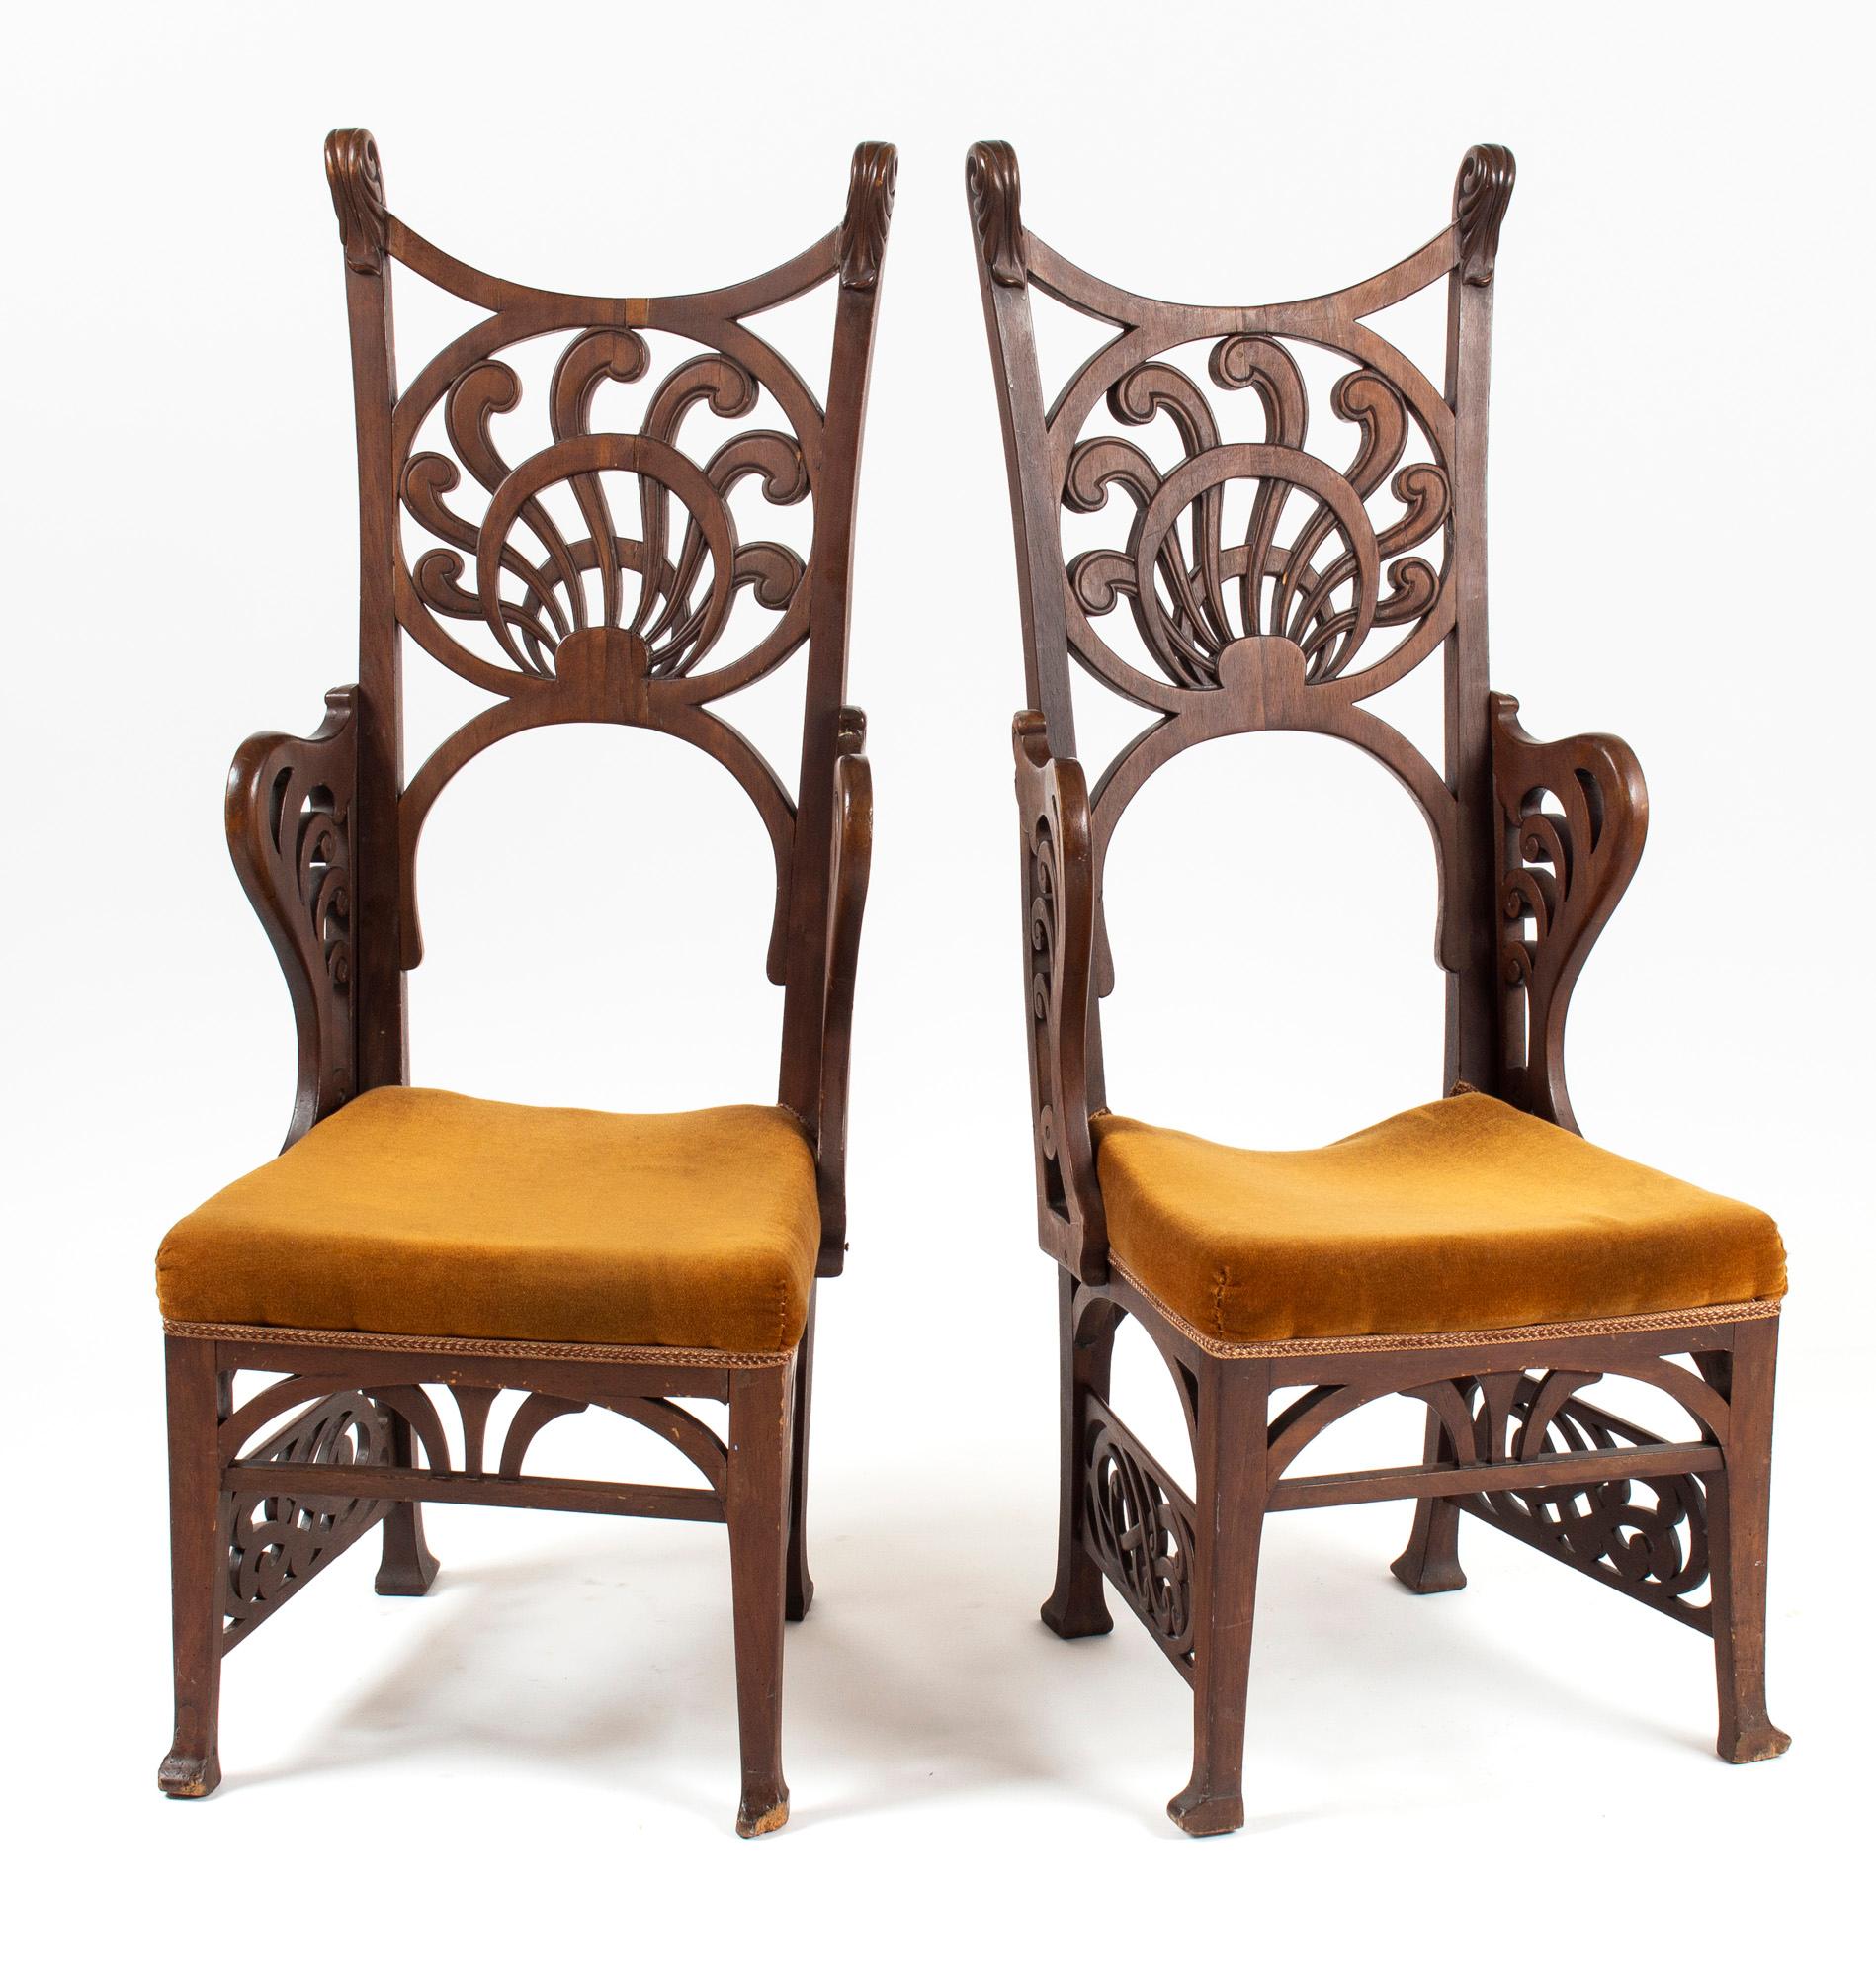 Four unique chairs in art nouveau style with carved walnut decor. The carved forms let the chairs be dated back to the 1900s artistic movements. The prolonged and sophisticated shapes, typical for the period, manifest the ideology of